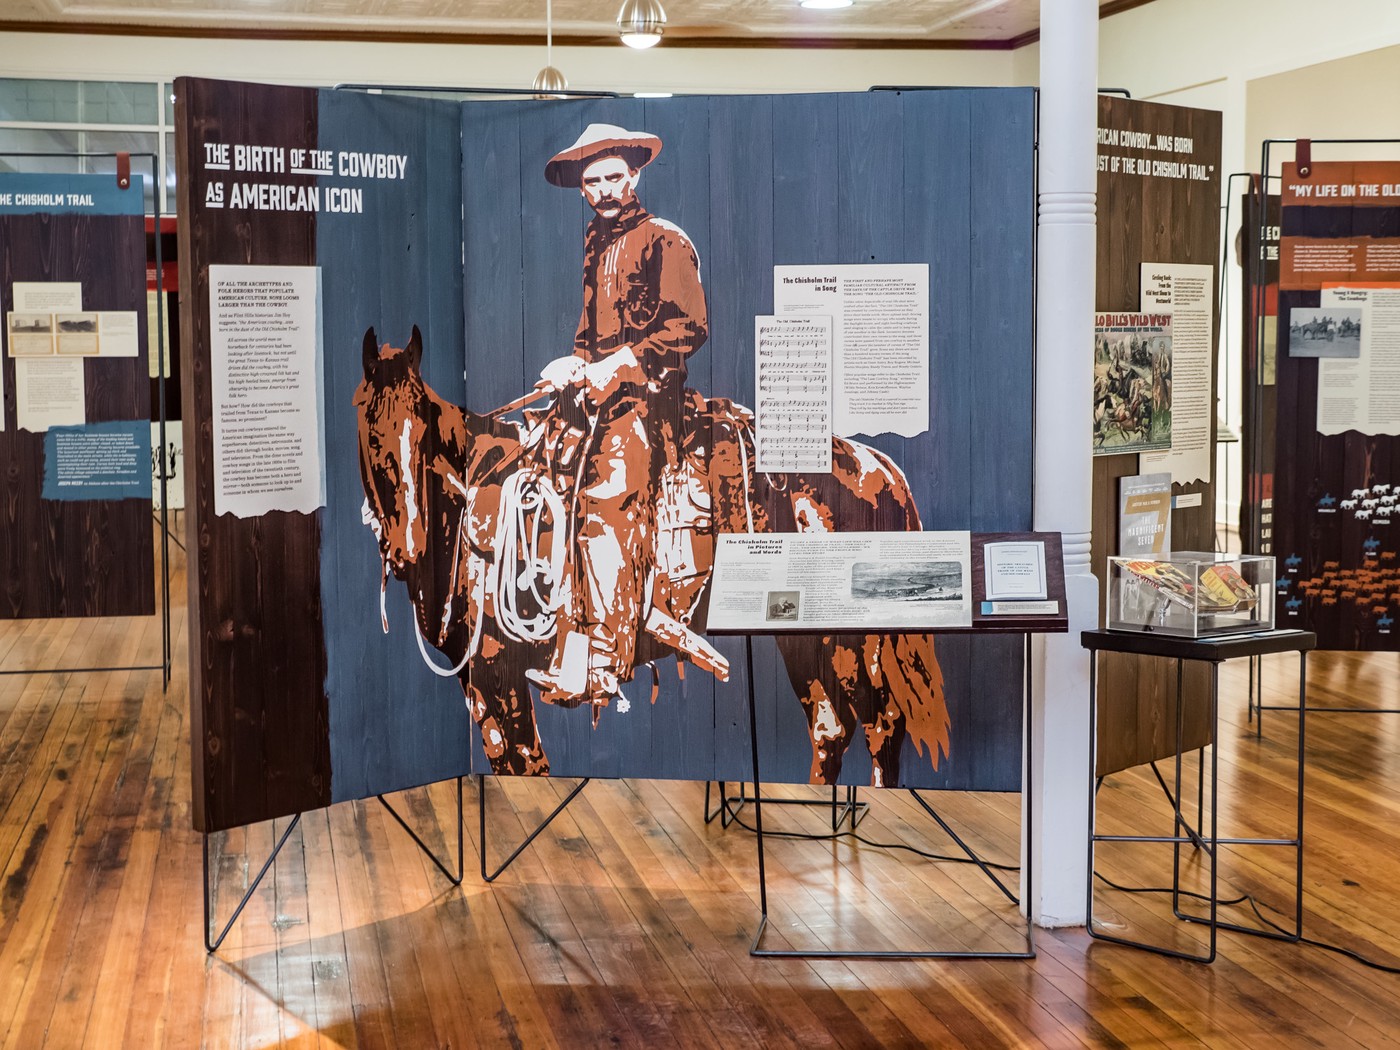 The Birth of the Cowboy as American Icon interpretive panel featuring large stenciled image of cowboy on horse